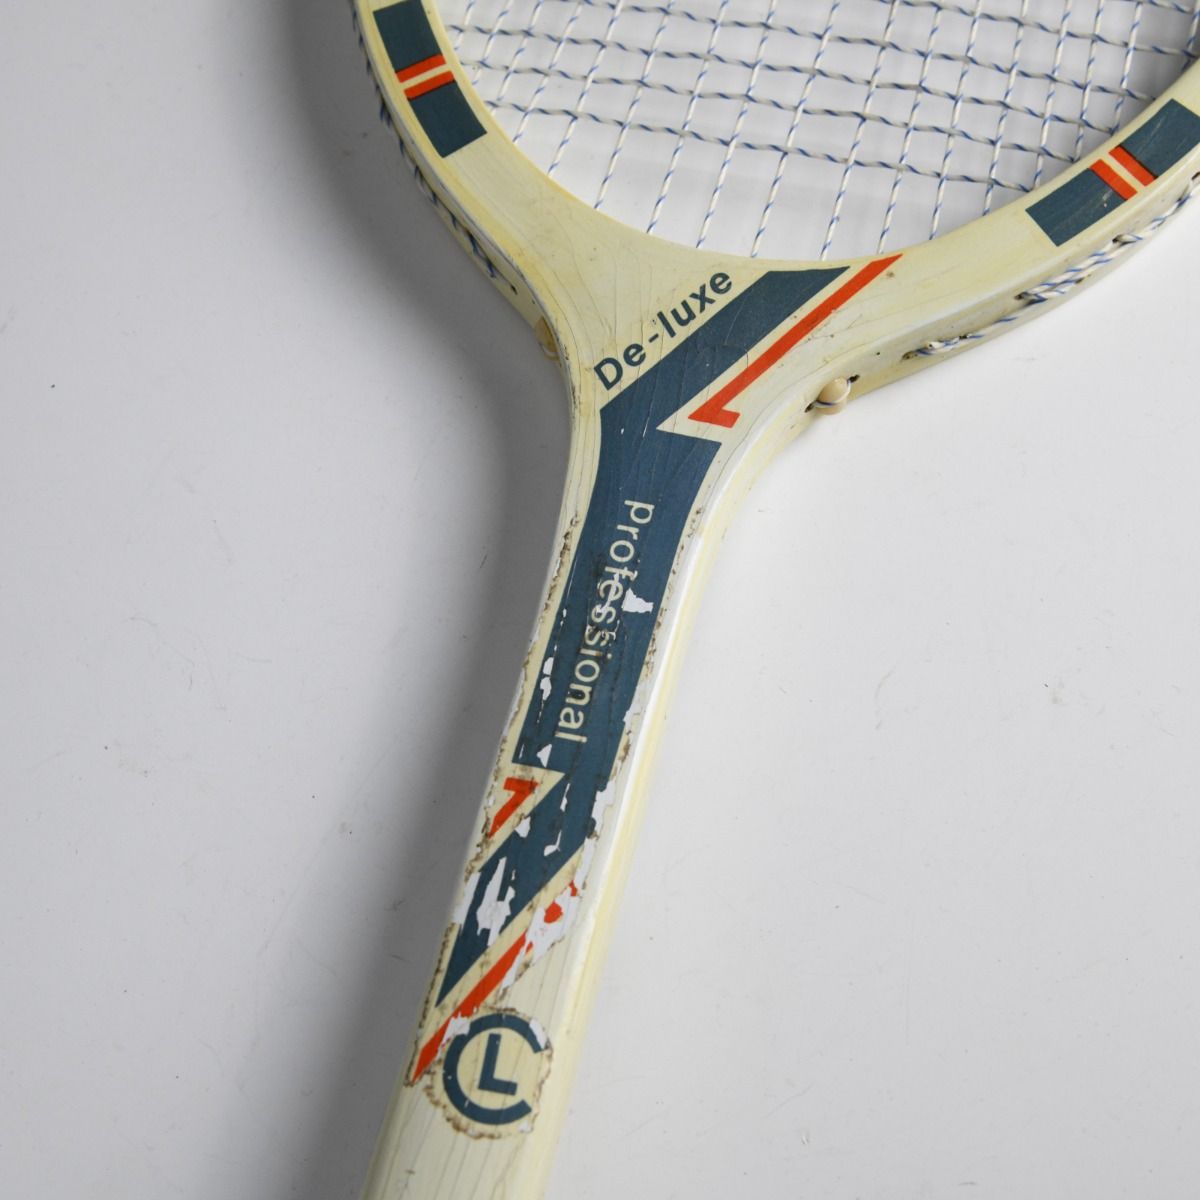 Vintage De-Luxe Wooden Squash Racket with Cover